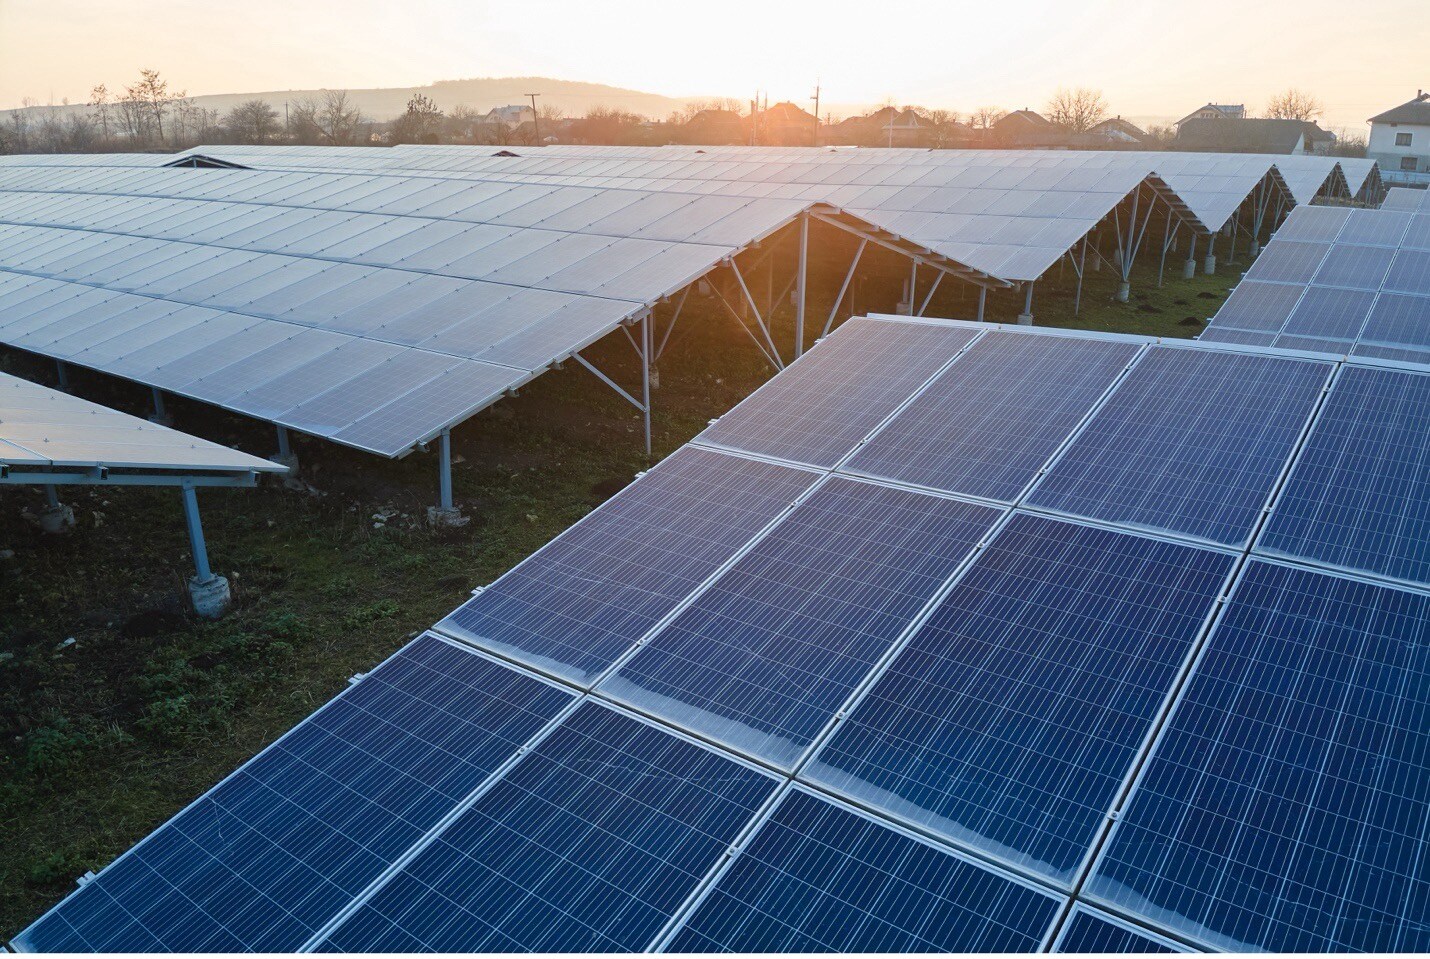 Read: 10 Ways Solar Panels Can Save Your Business Money and Boost Sustainability